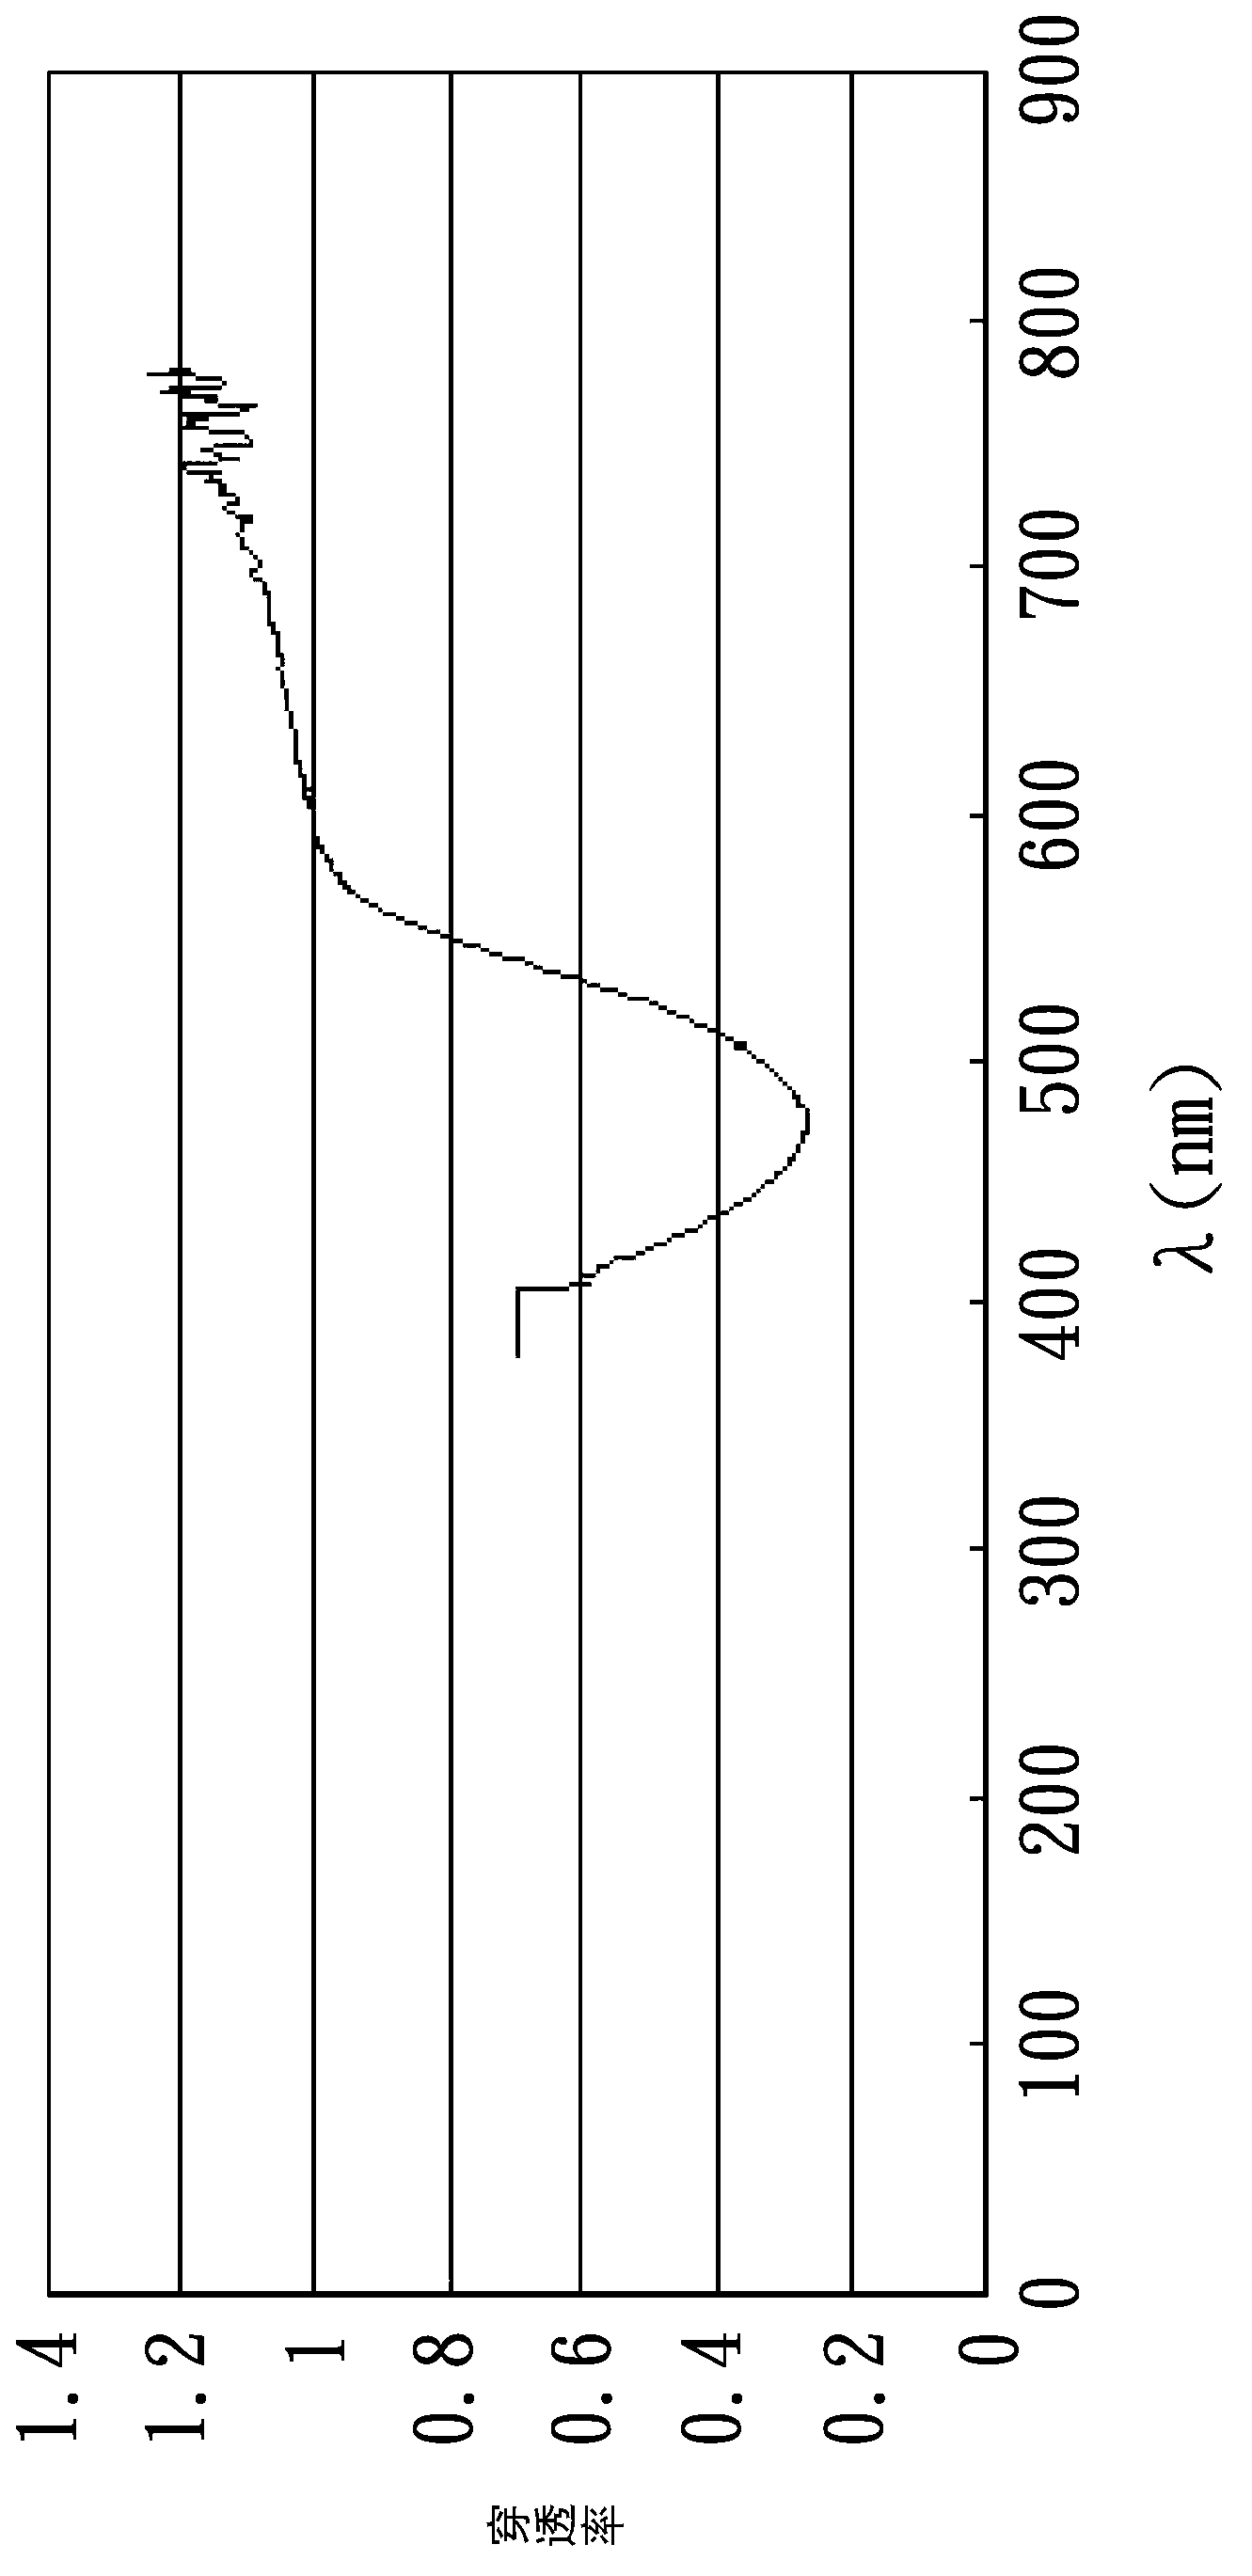 Display panel and color optical filter